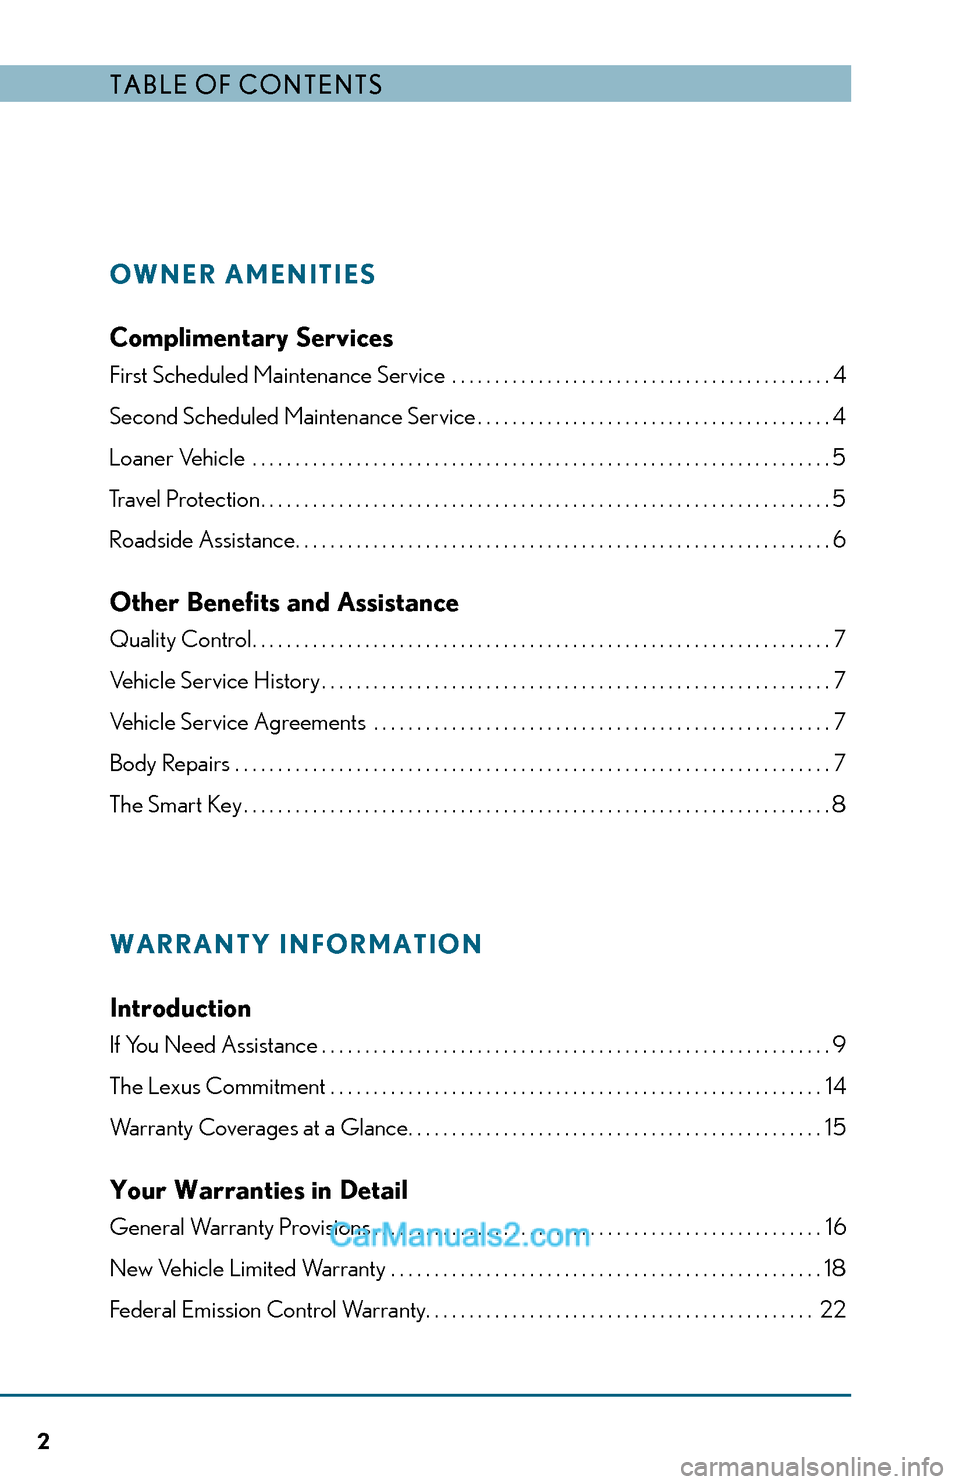 Lexus ES350 2014  Warranty and Services Guide Table of ConTenTs
Owner Amenities
Complimentary services
First Scheduled Maintenance Service   . . . . . . . . . . . . . . . . . . . . . . . . . . . . . . . . . . . . . . . . . . . . 4
Second Schedule